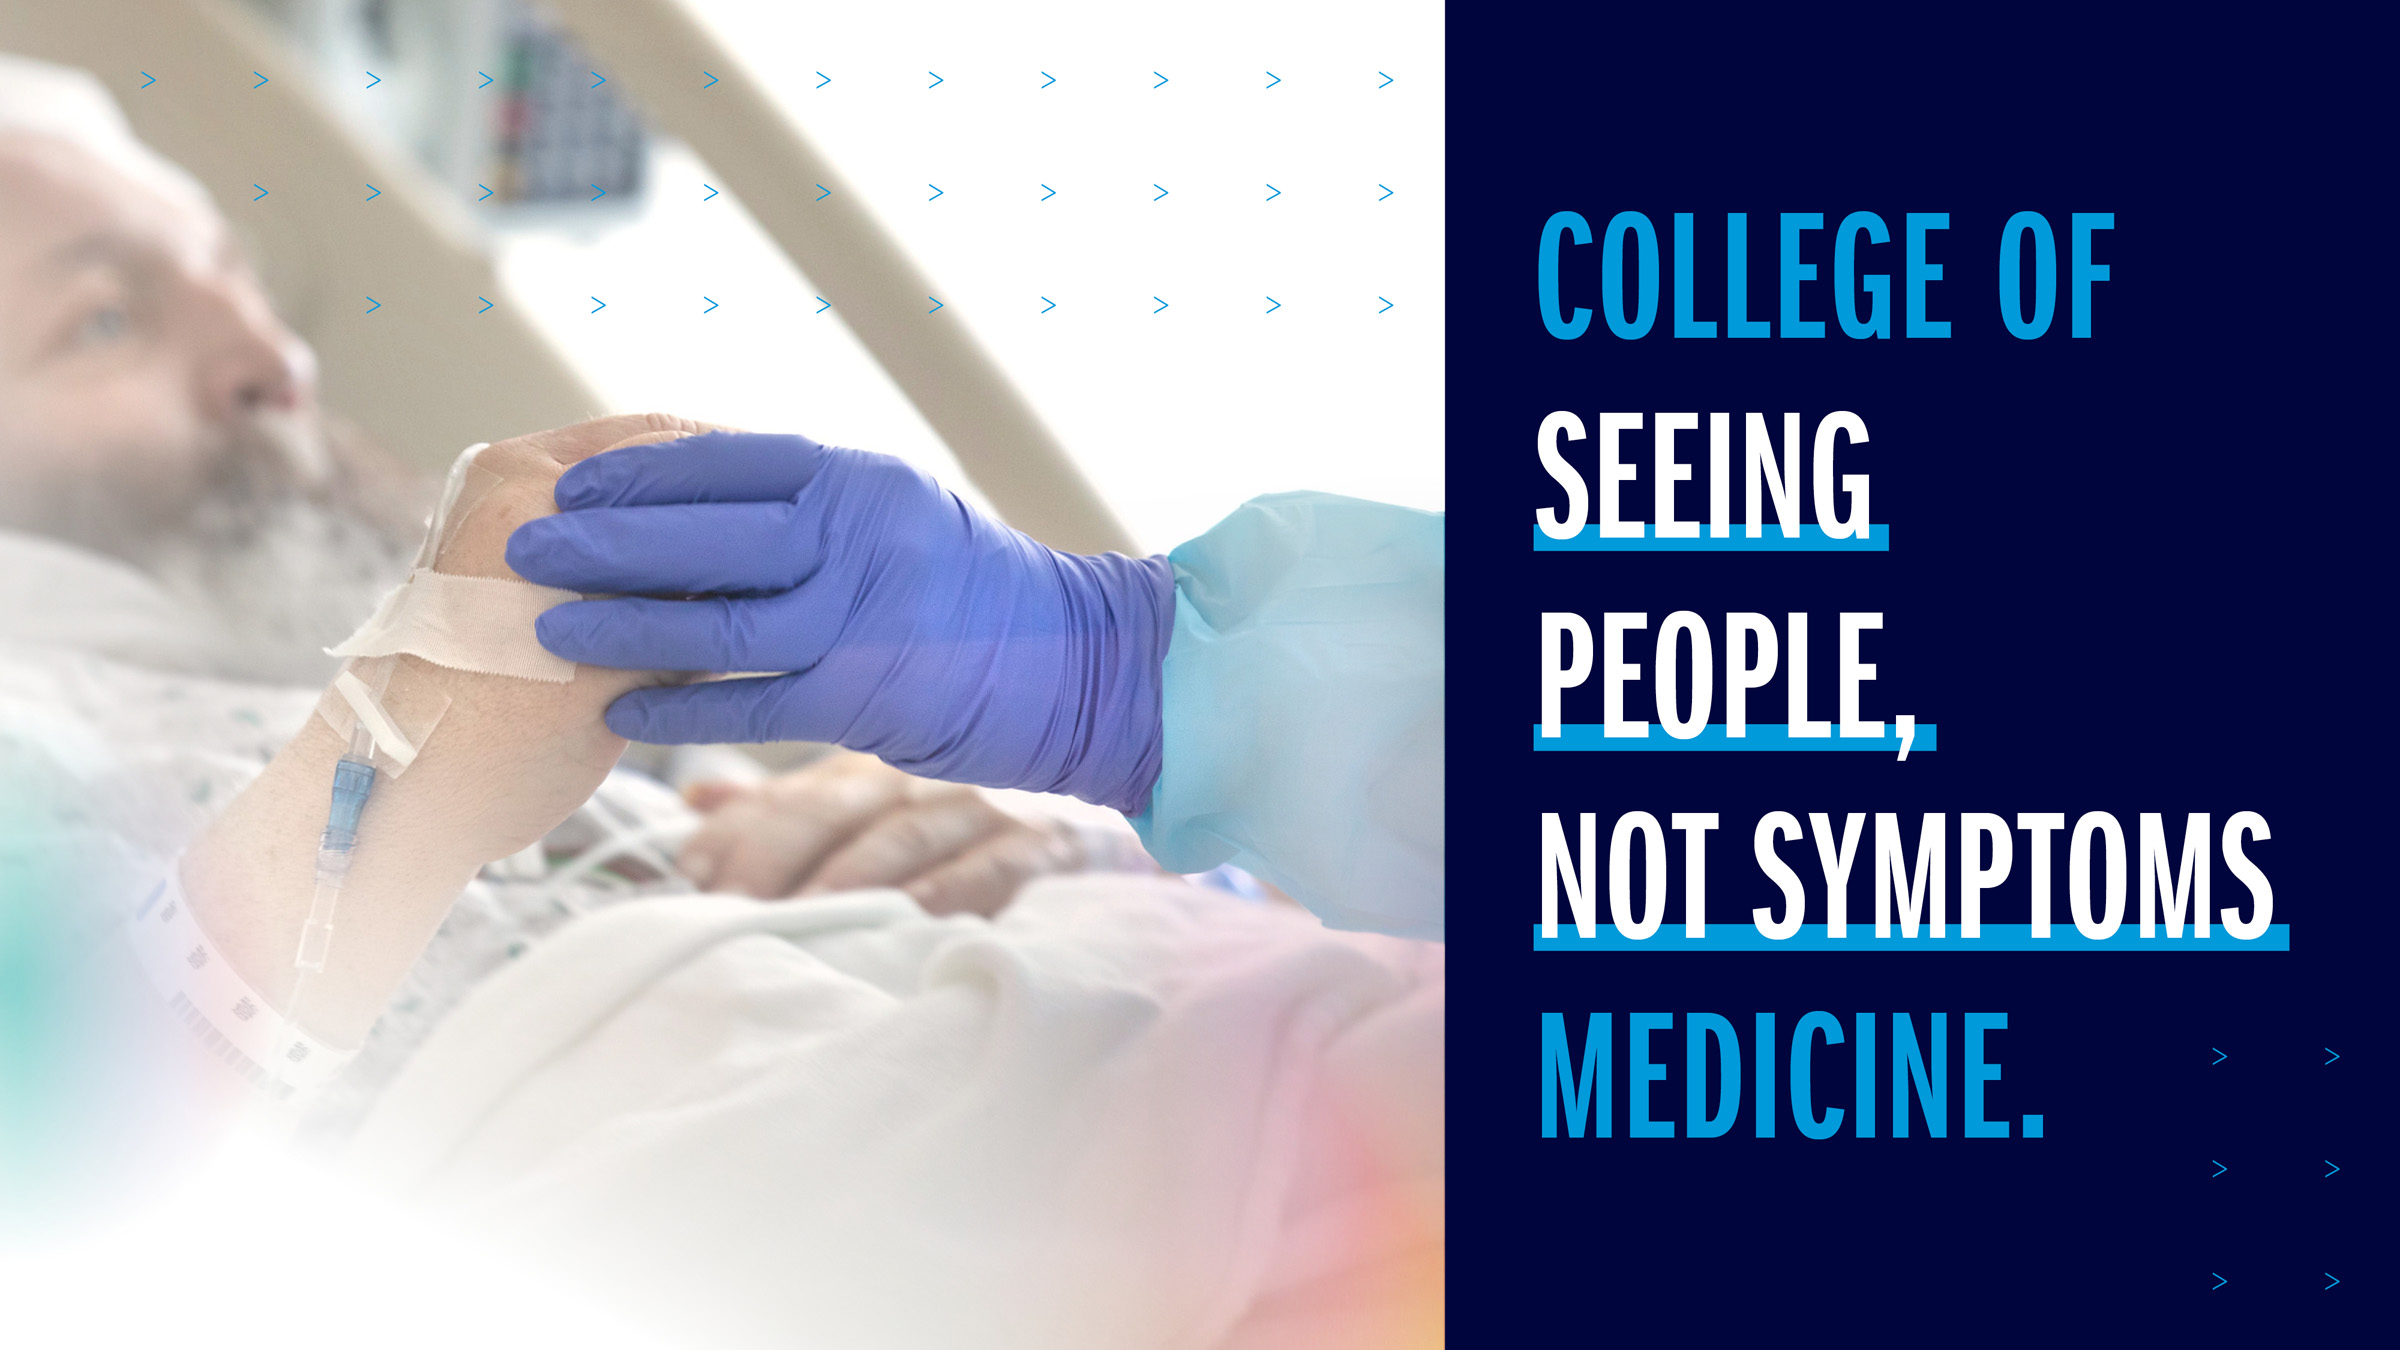 College of Seeing People, Not Symptoms Medicine and close up of patient's hand holding a gloved hand